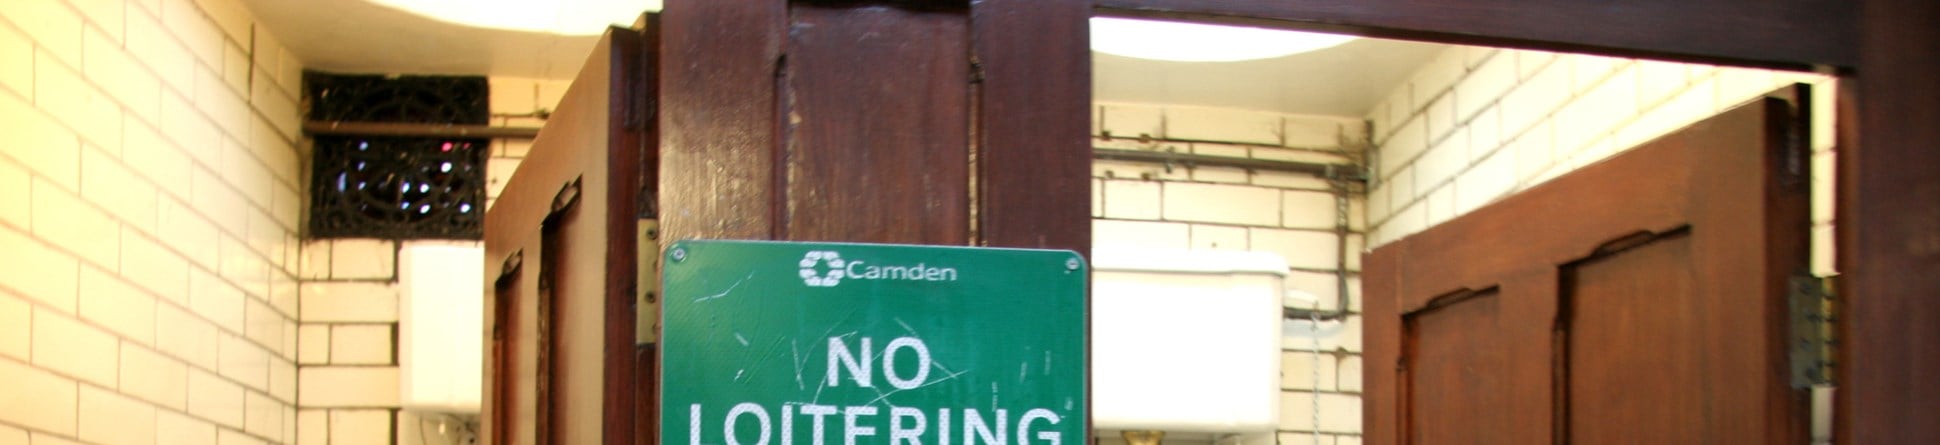 'No Loitering' sign in toilets